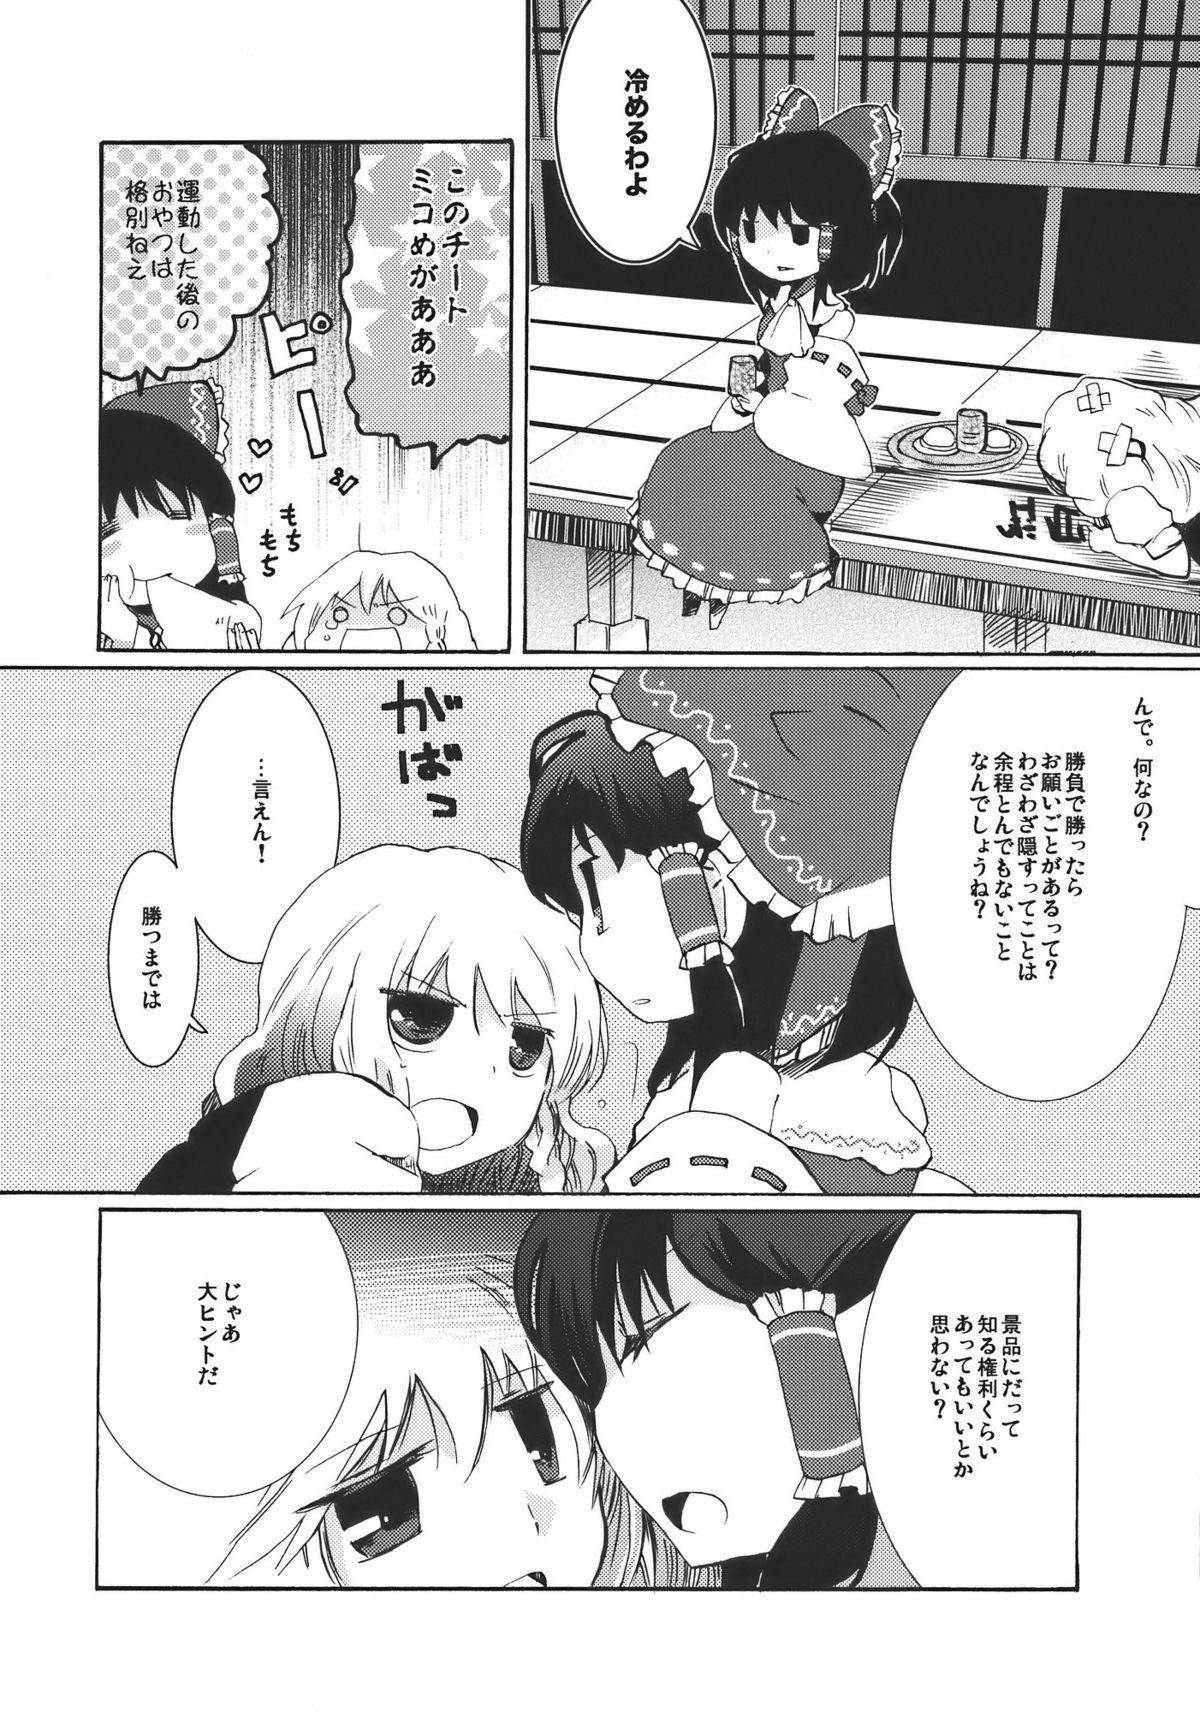 Dom Yumeiro Dolce - Touhou project Hotwife - Page 6